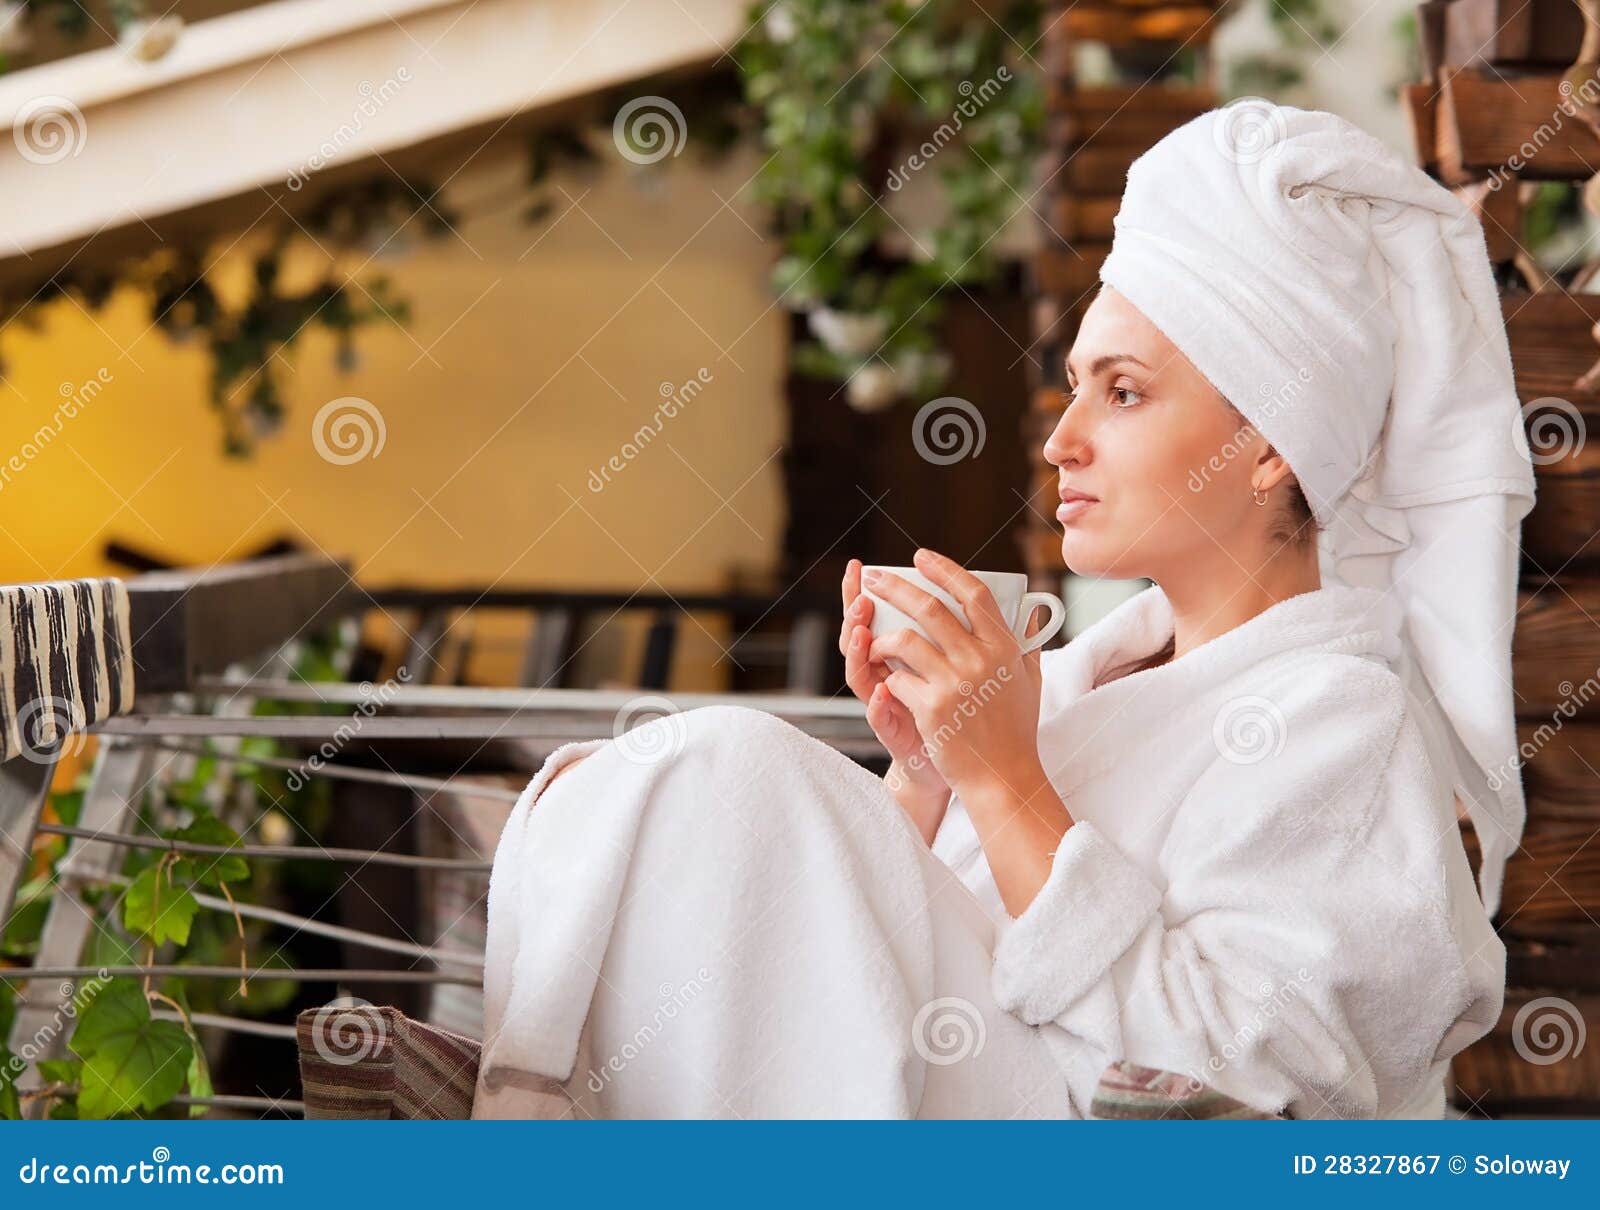 Attractive Young Woman Enjoy Morning Coffee Stock Image - Image of ...